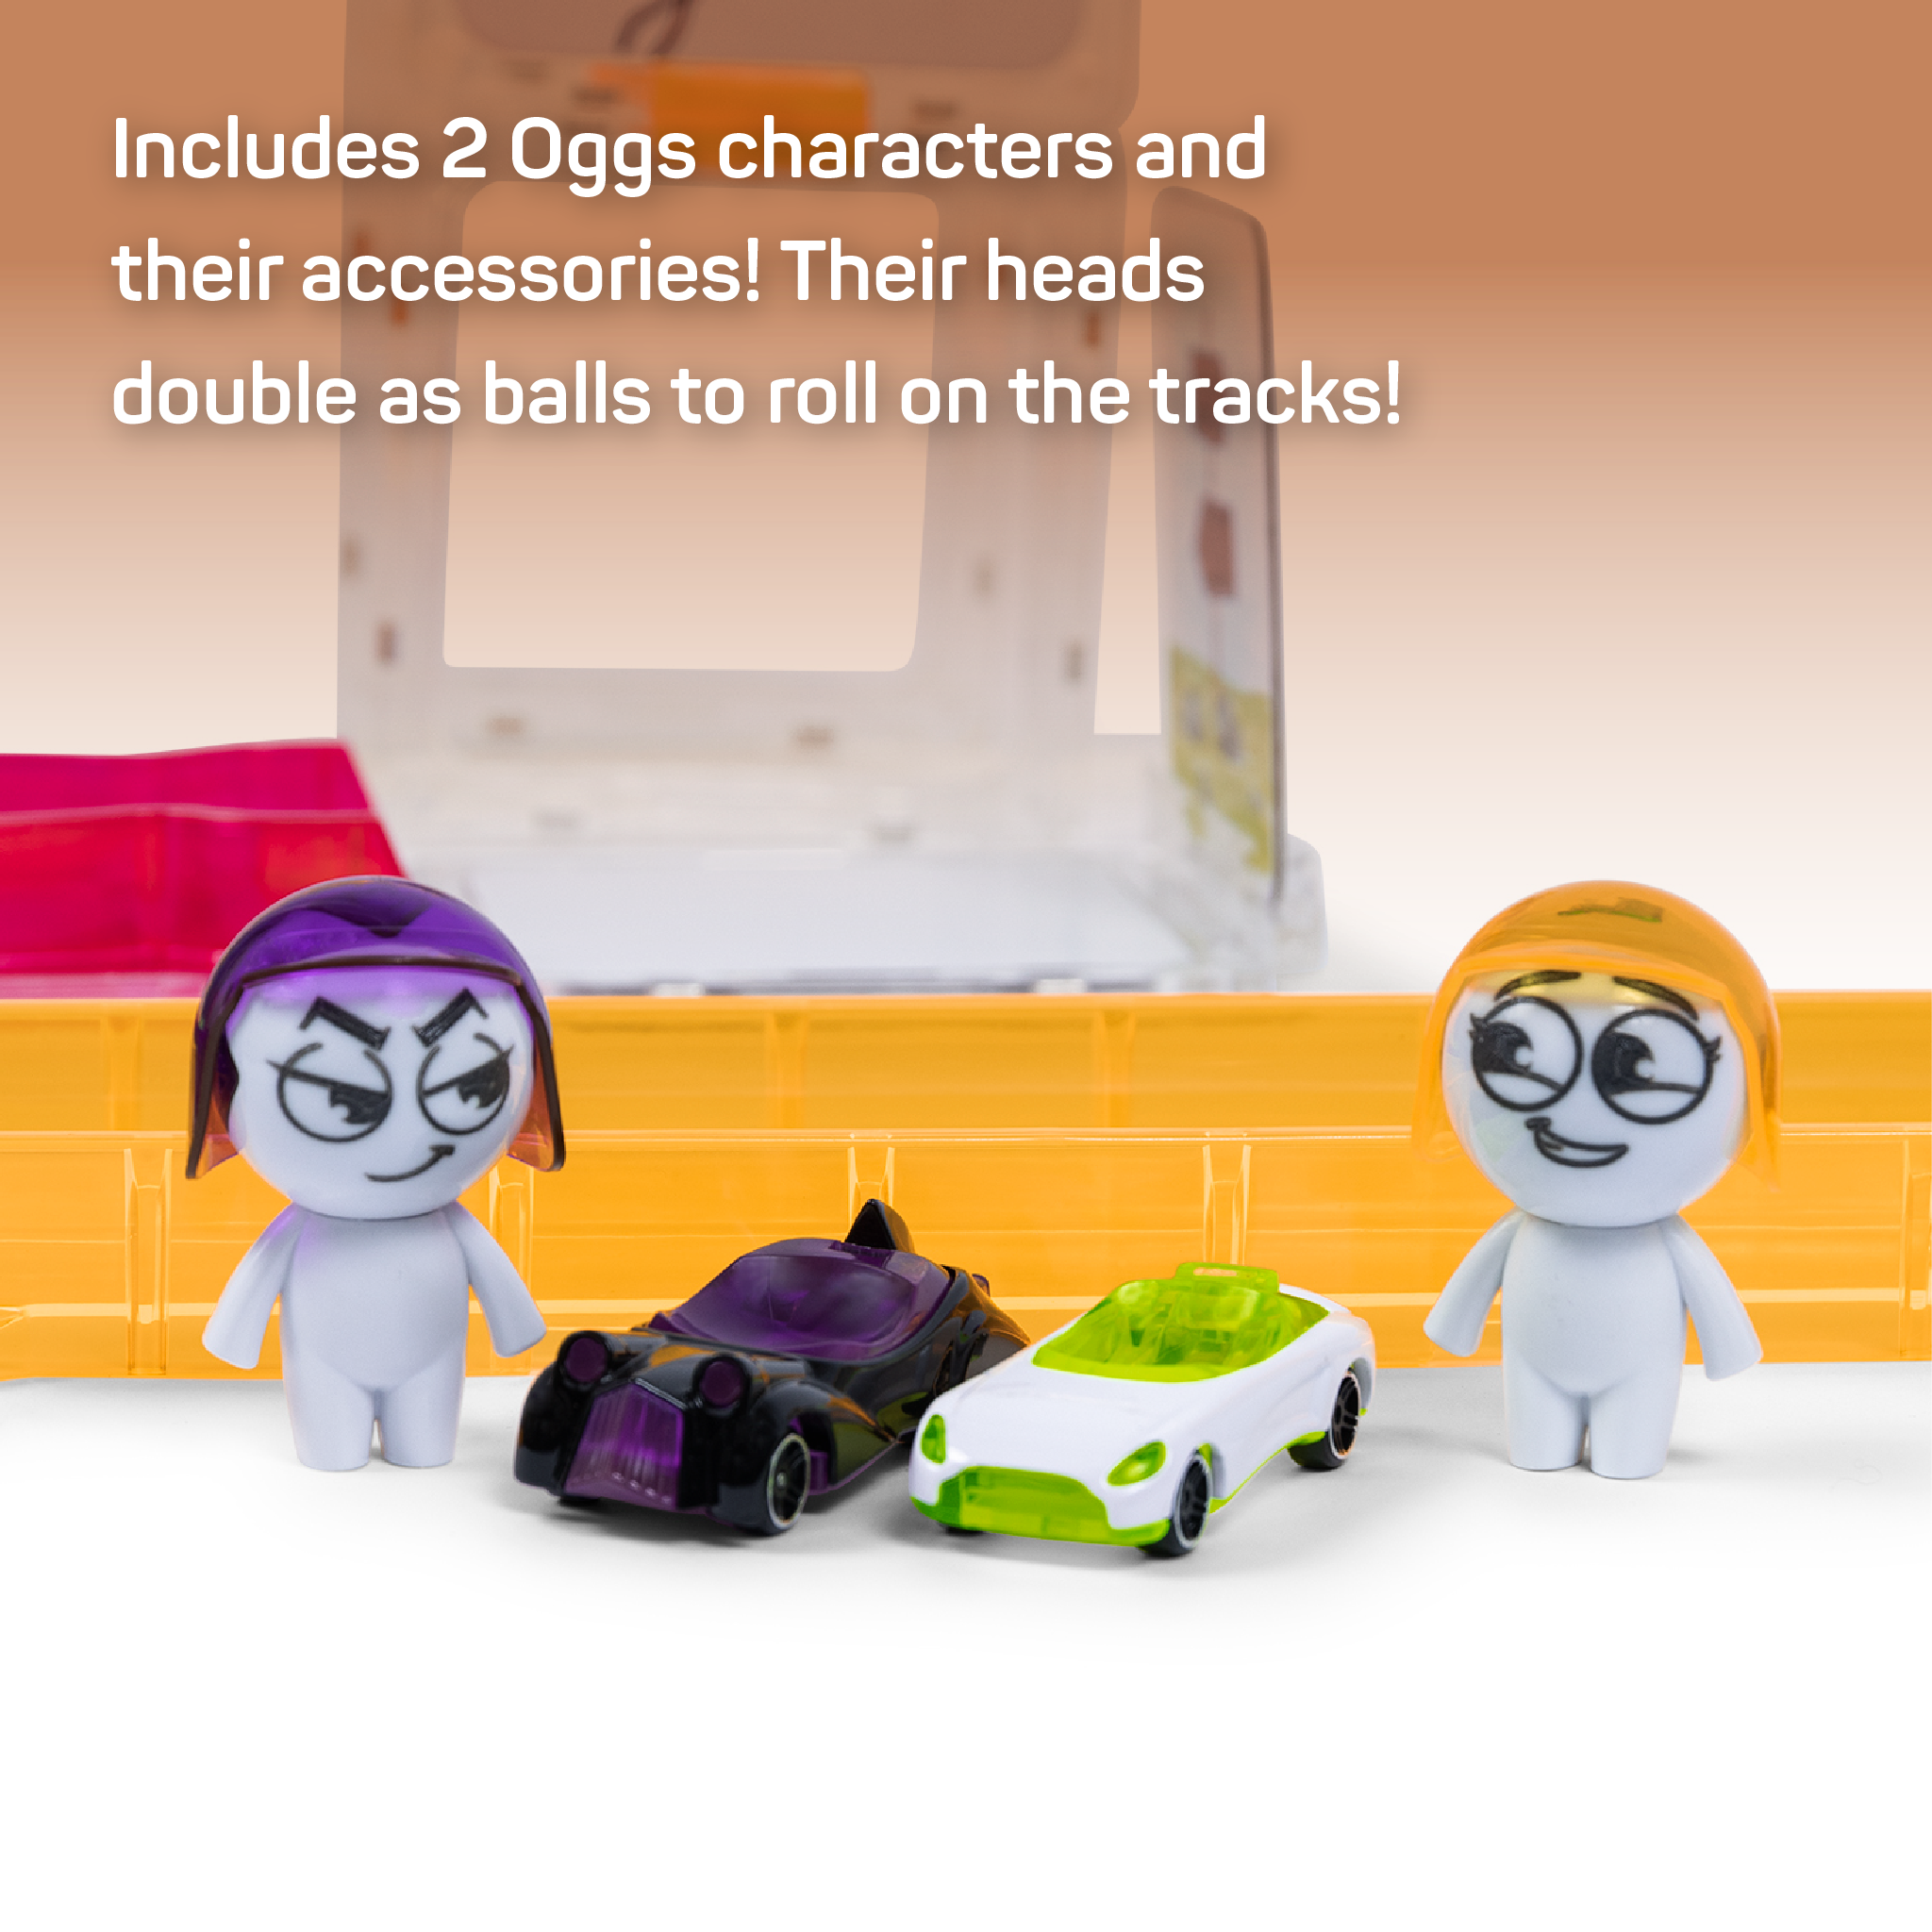 Erggs Crash Arena characters and their cars with text that reads "Includes 2 Oggs characters and their accessories! Their heads double as balls to roll on the tracks!"